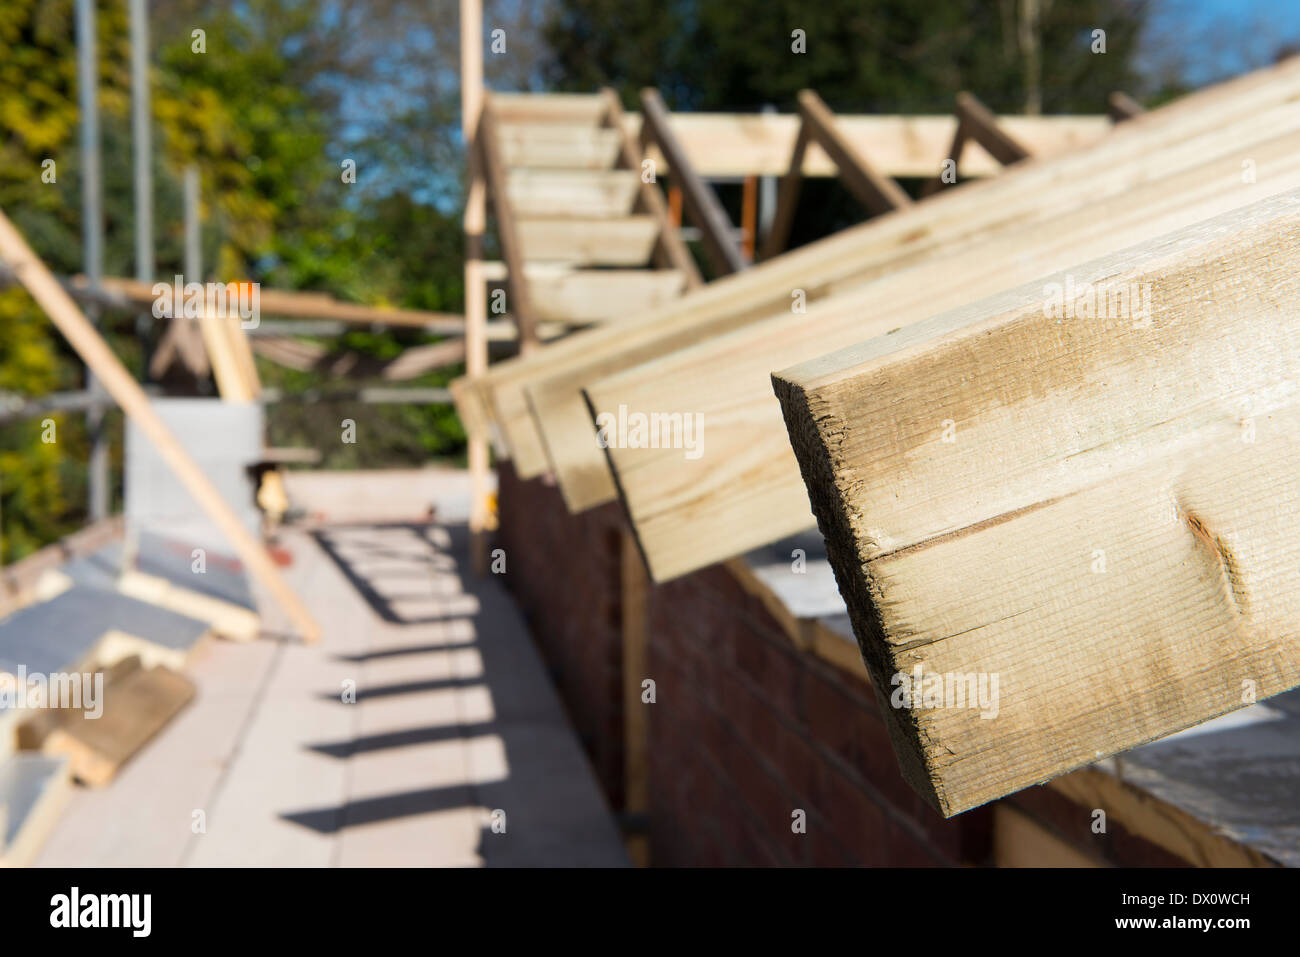 Construction work on a house. Stock Photo